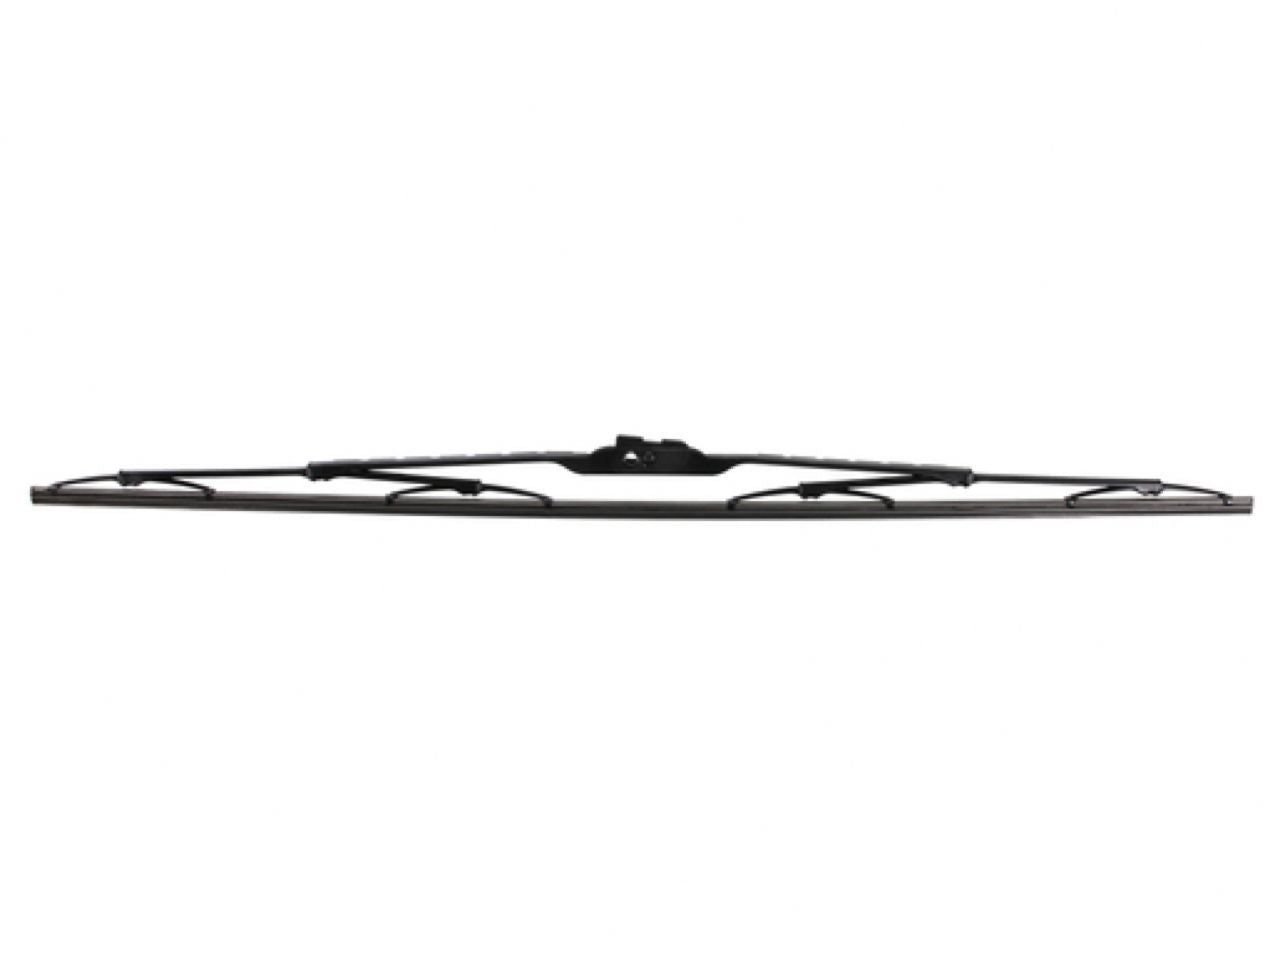 Anco Windshield Wipers 91-28 Item Image